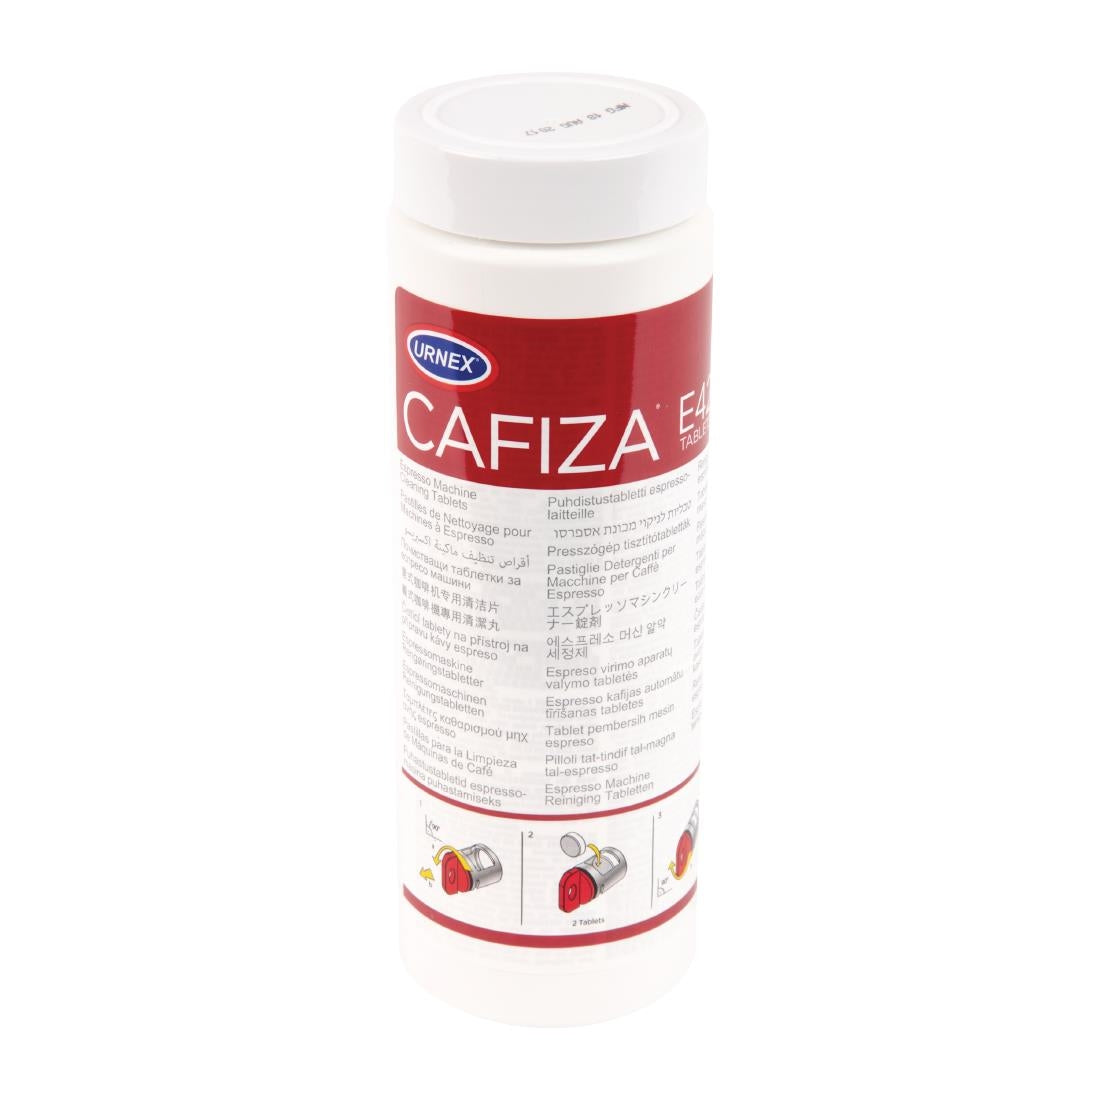 CX504 Urnex Cafiza E42 Espresso Machine Cleaner Tablets 3g (Pack of 200) JD Catering Equipment Solutions Ltd